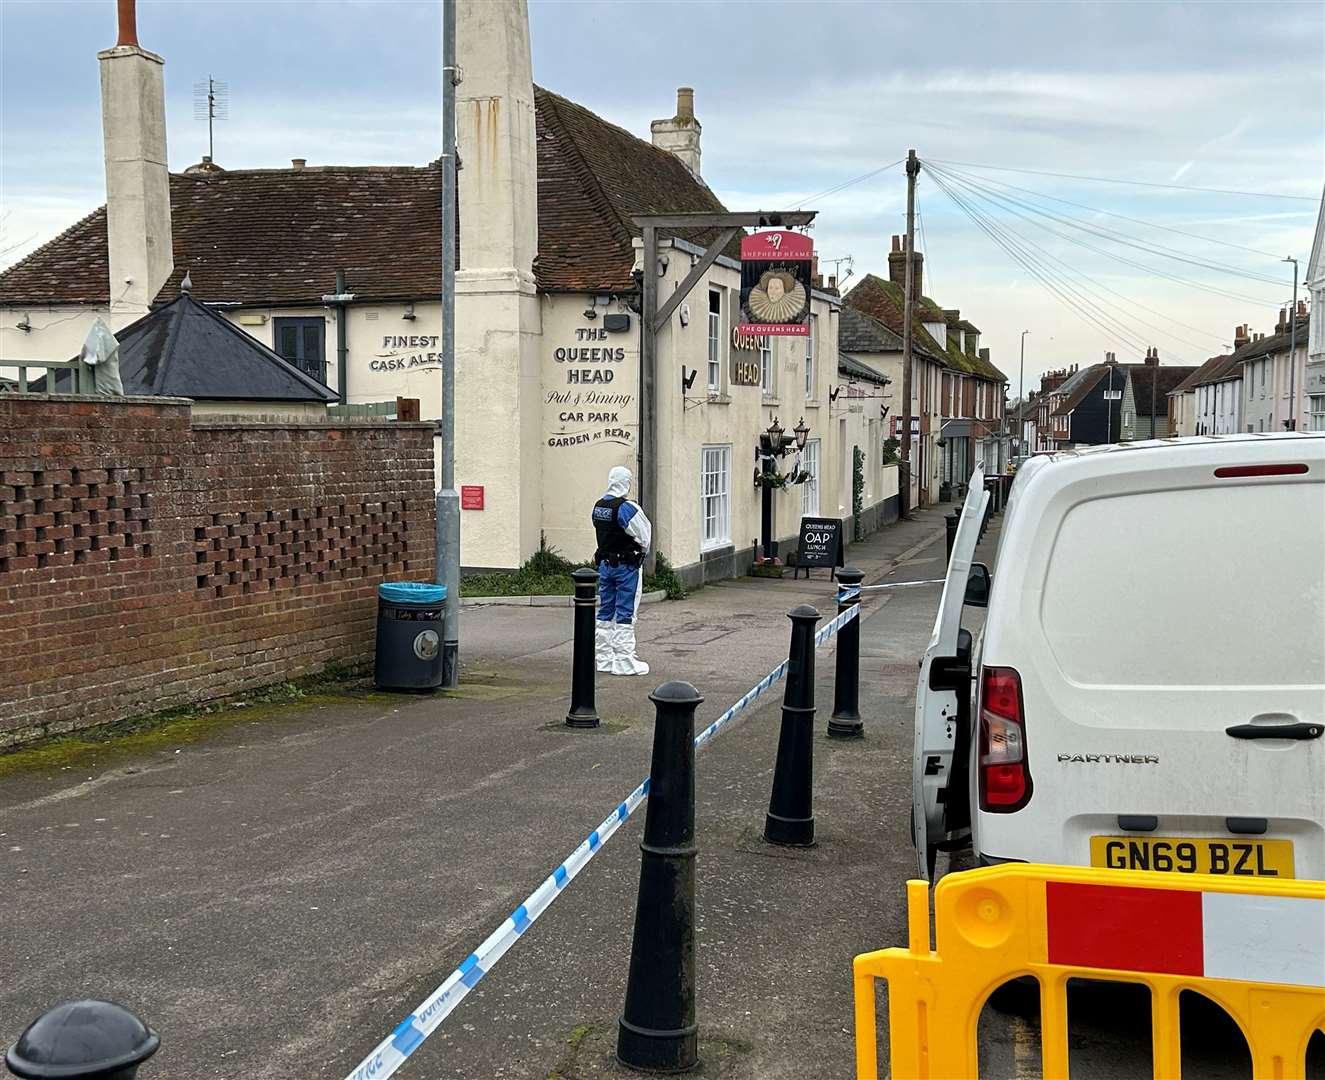 Police were called to The Queens Head pub